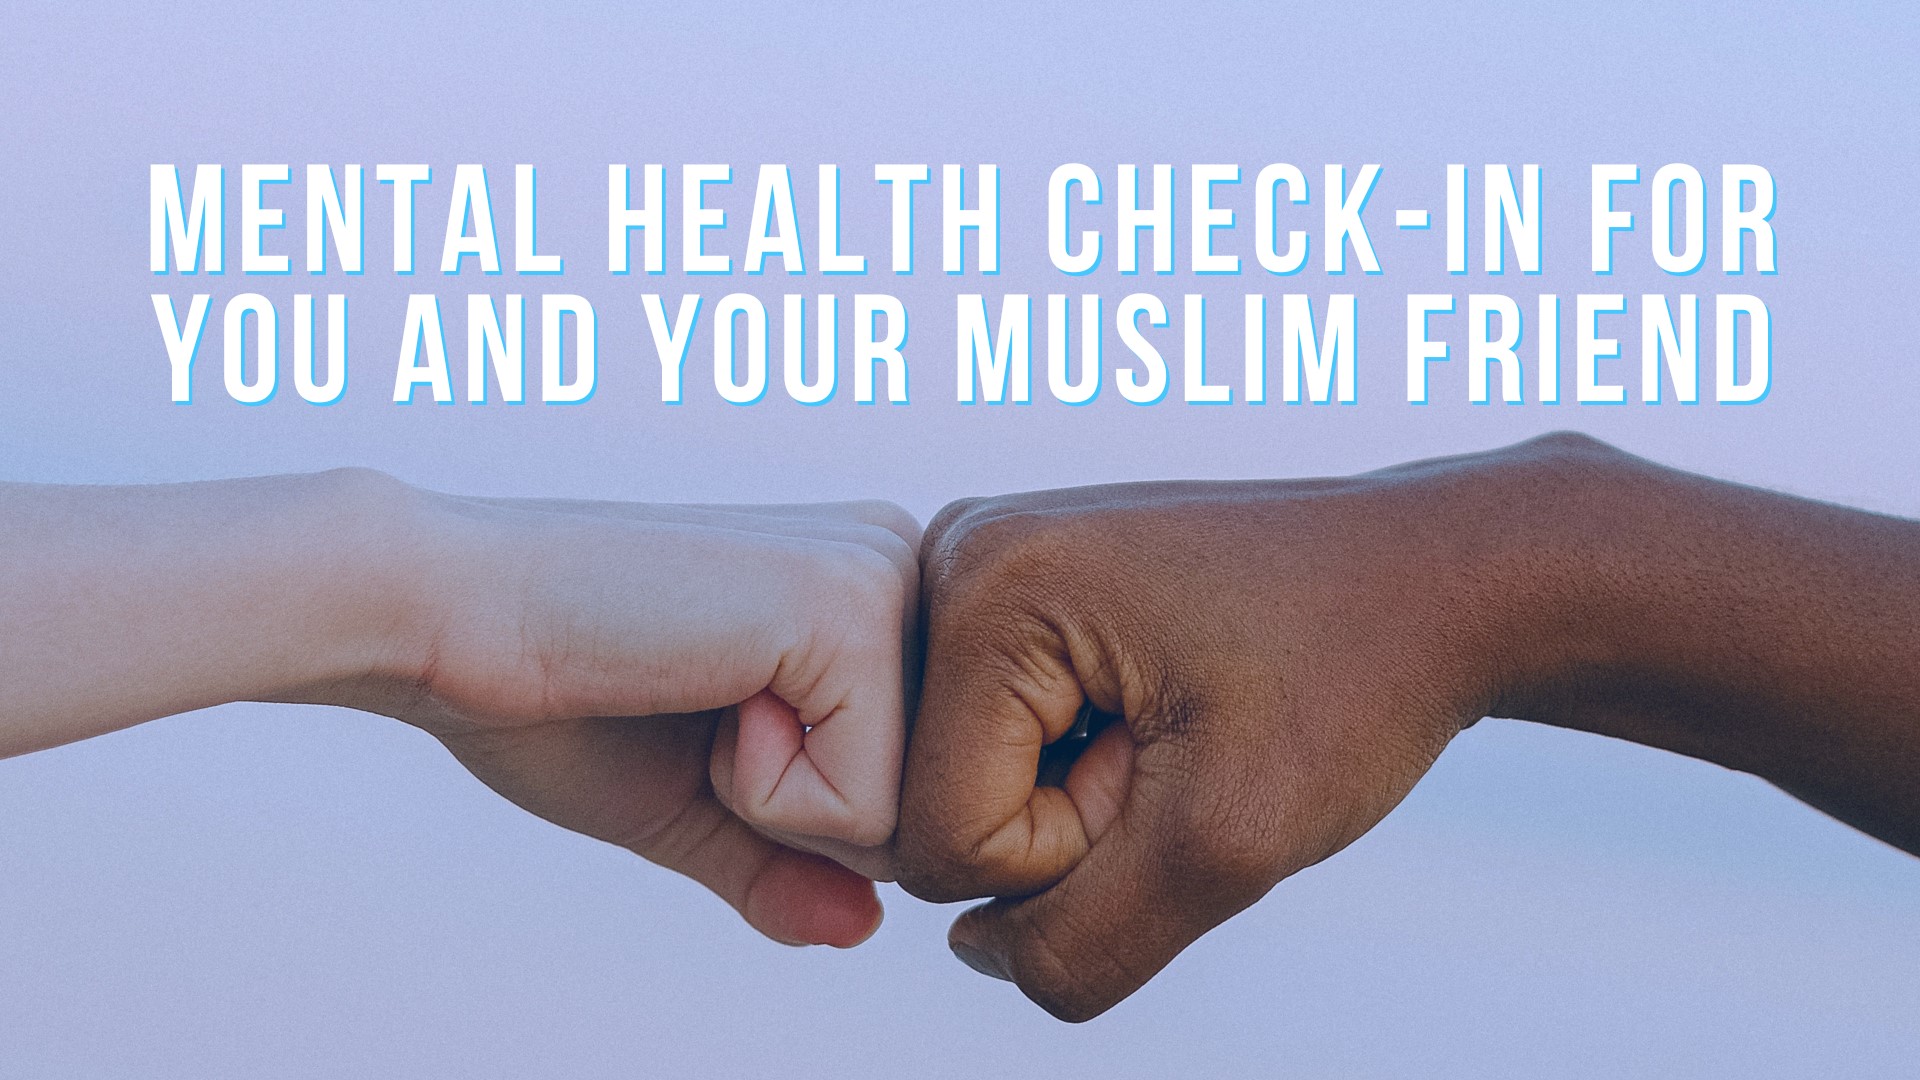 Mental health check-in for you and your Muslim friend